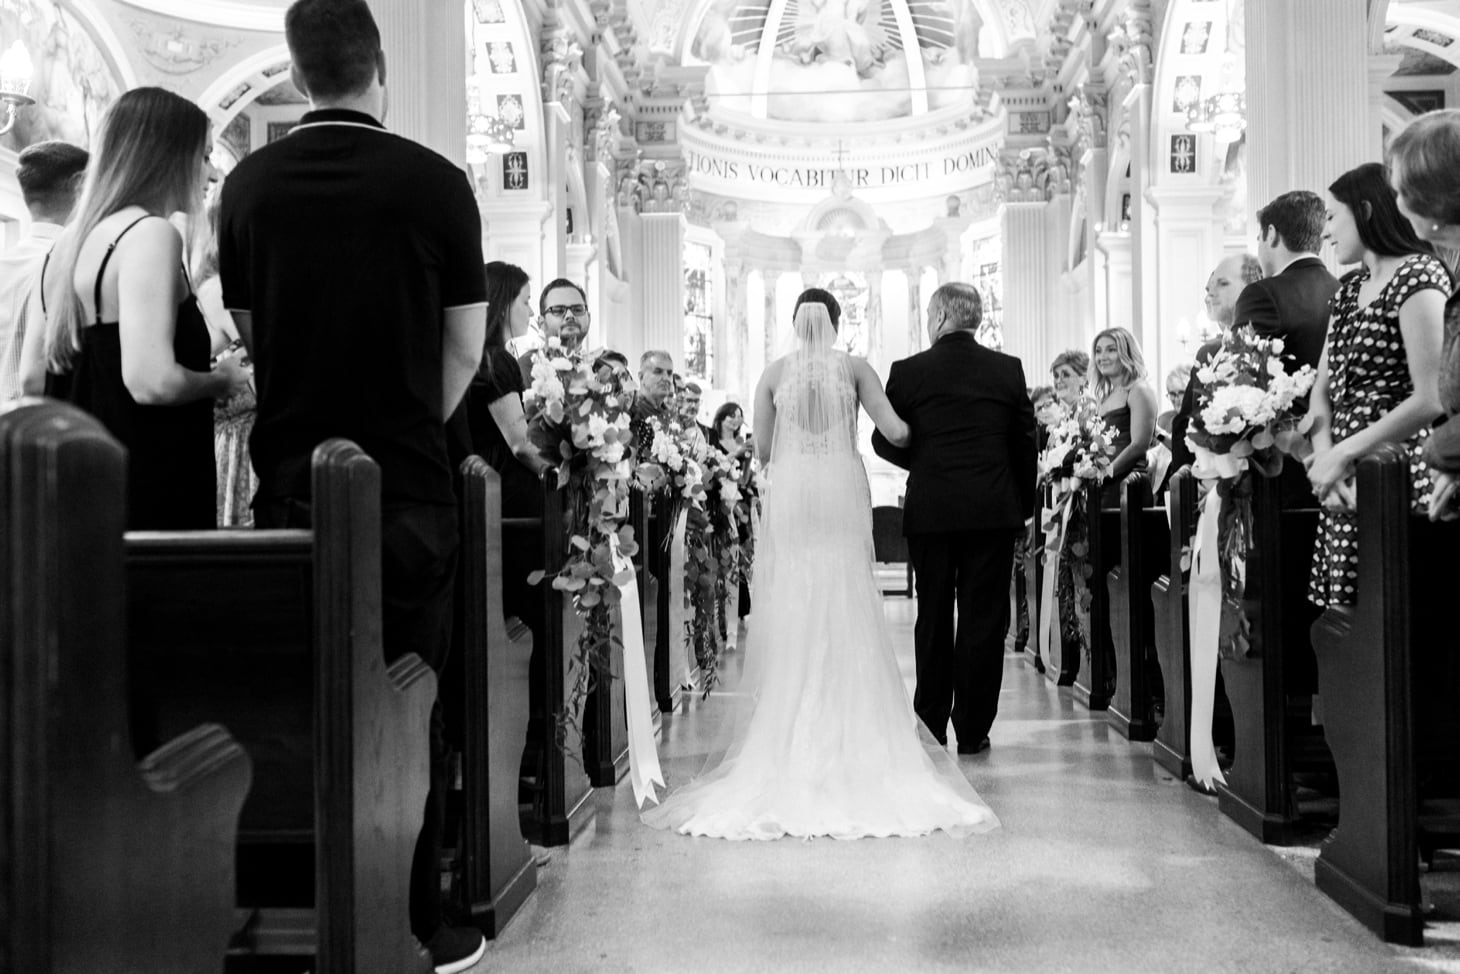 25 bride walks down aisle at wedding ceremony in new jersey